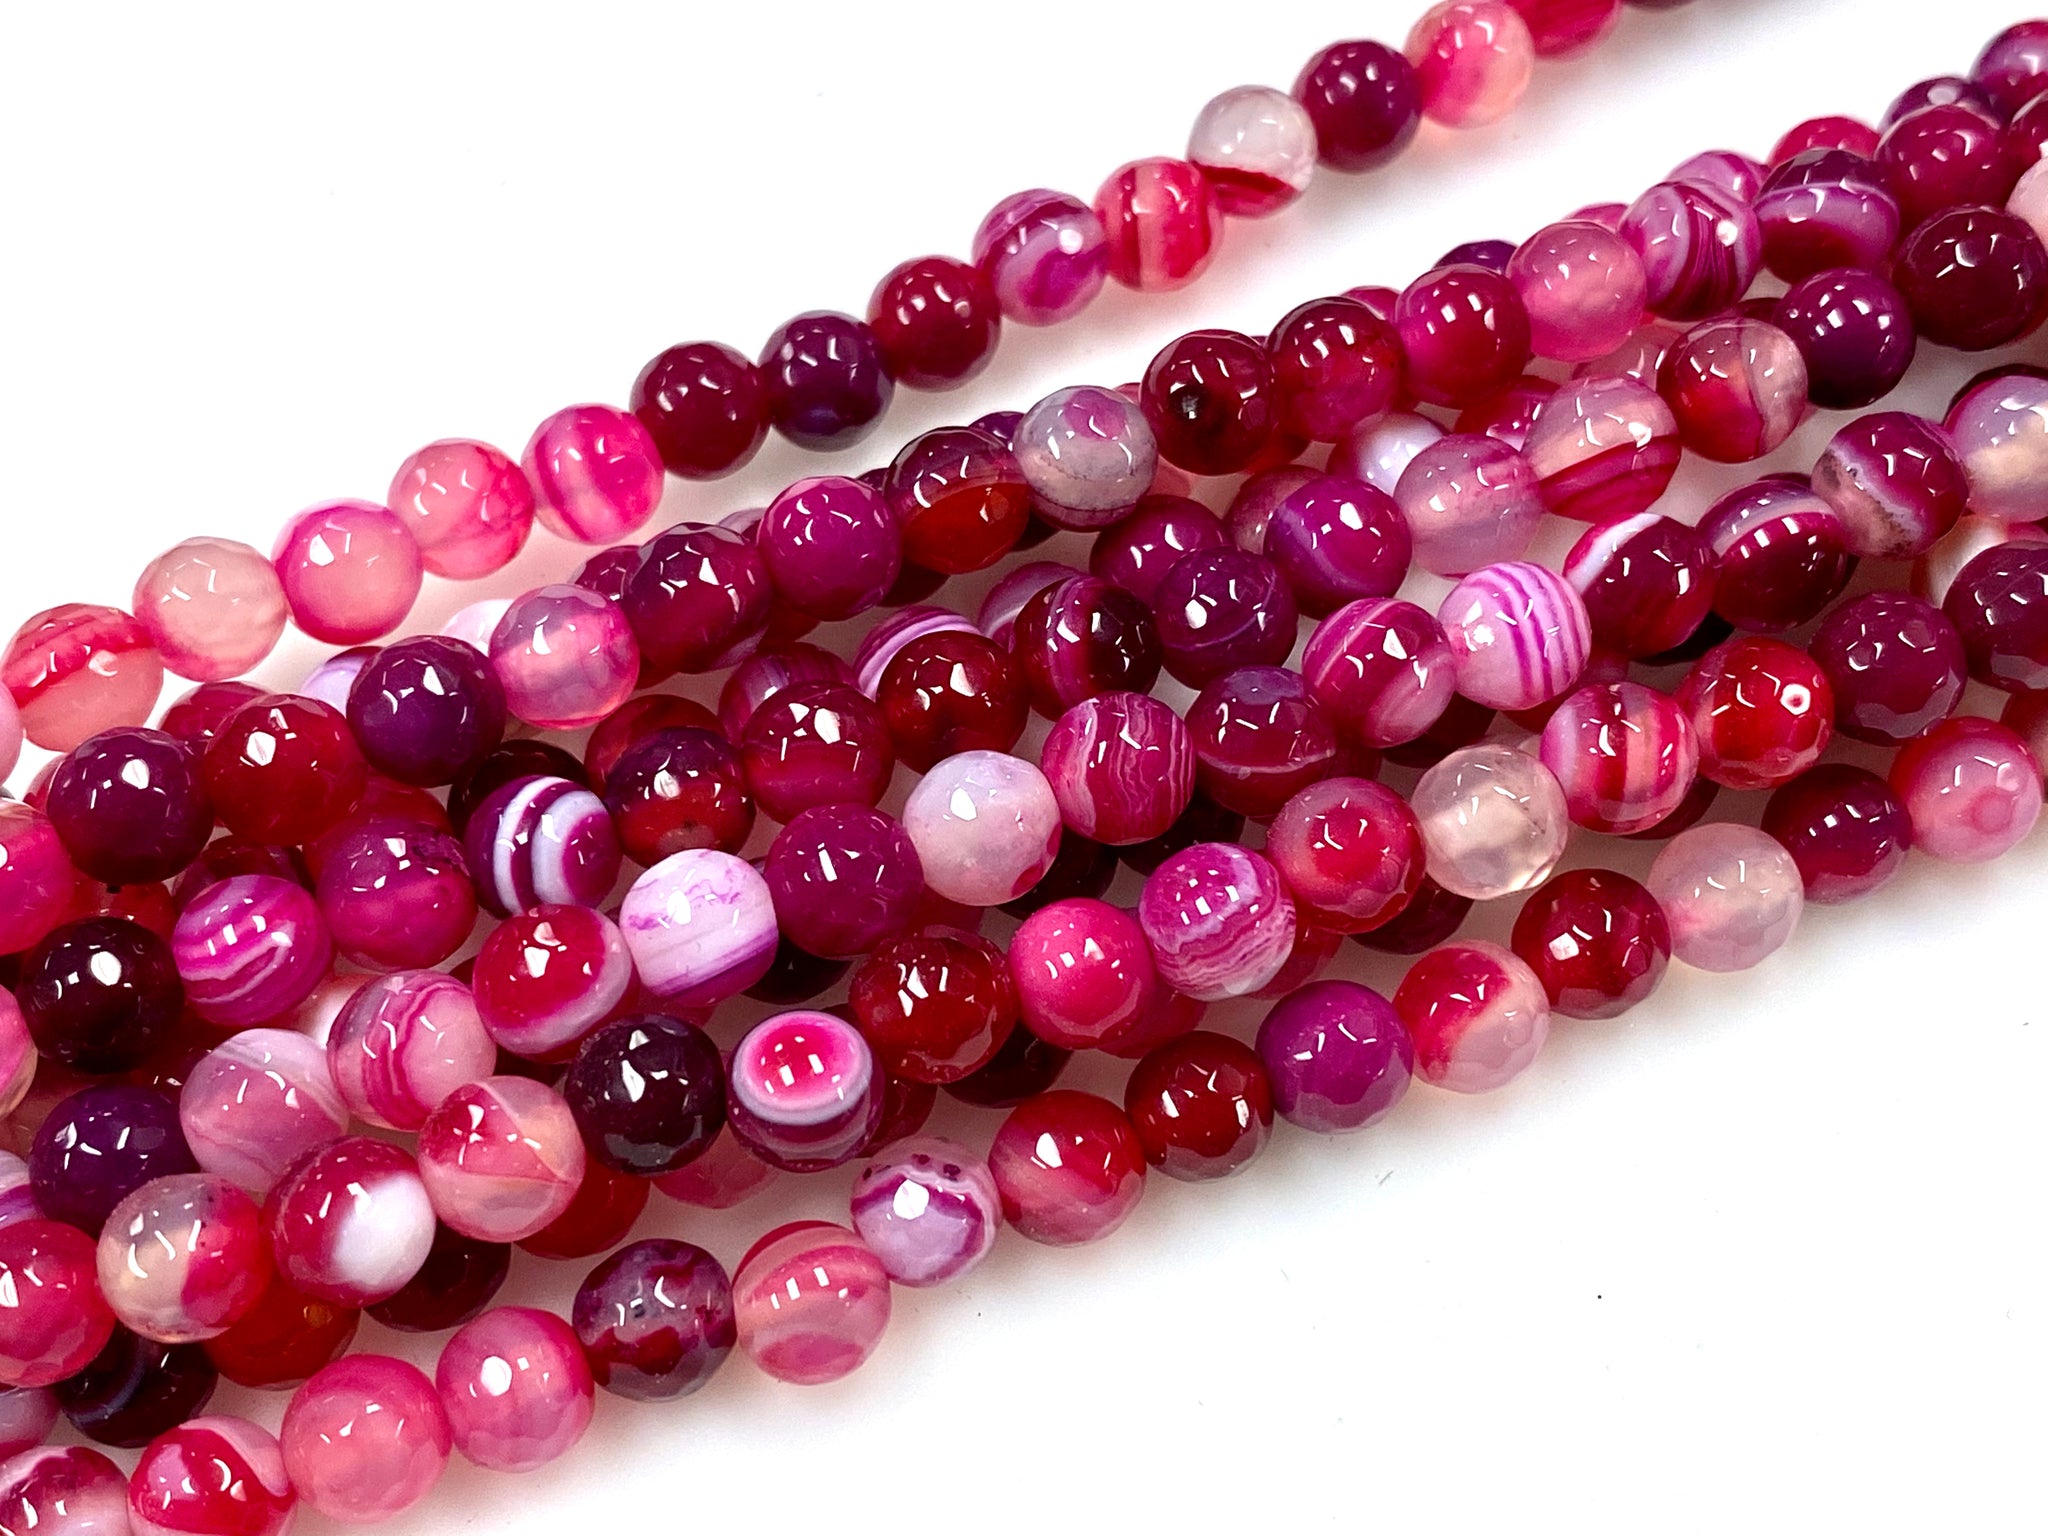 Natural Fuchsia Agate Beads / Faceted Round Shape Beads / Healing Energy Stone Beads / 6mm 2 Strand Gemstone Beads